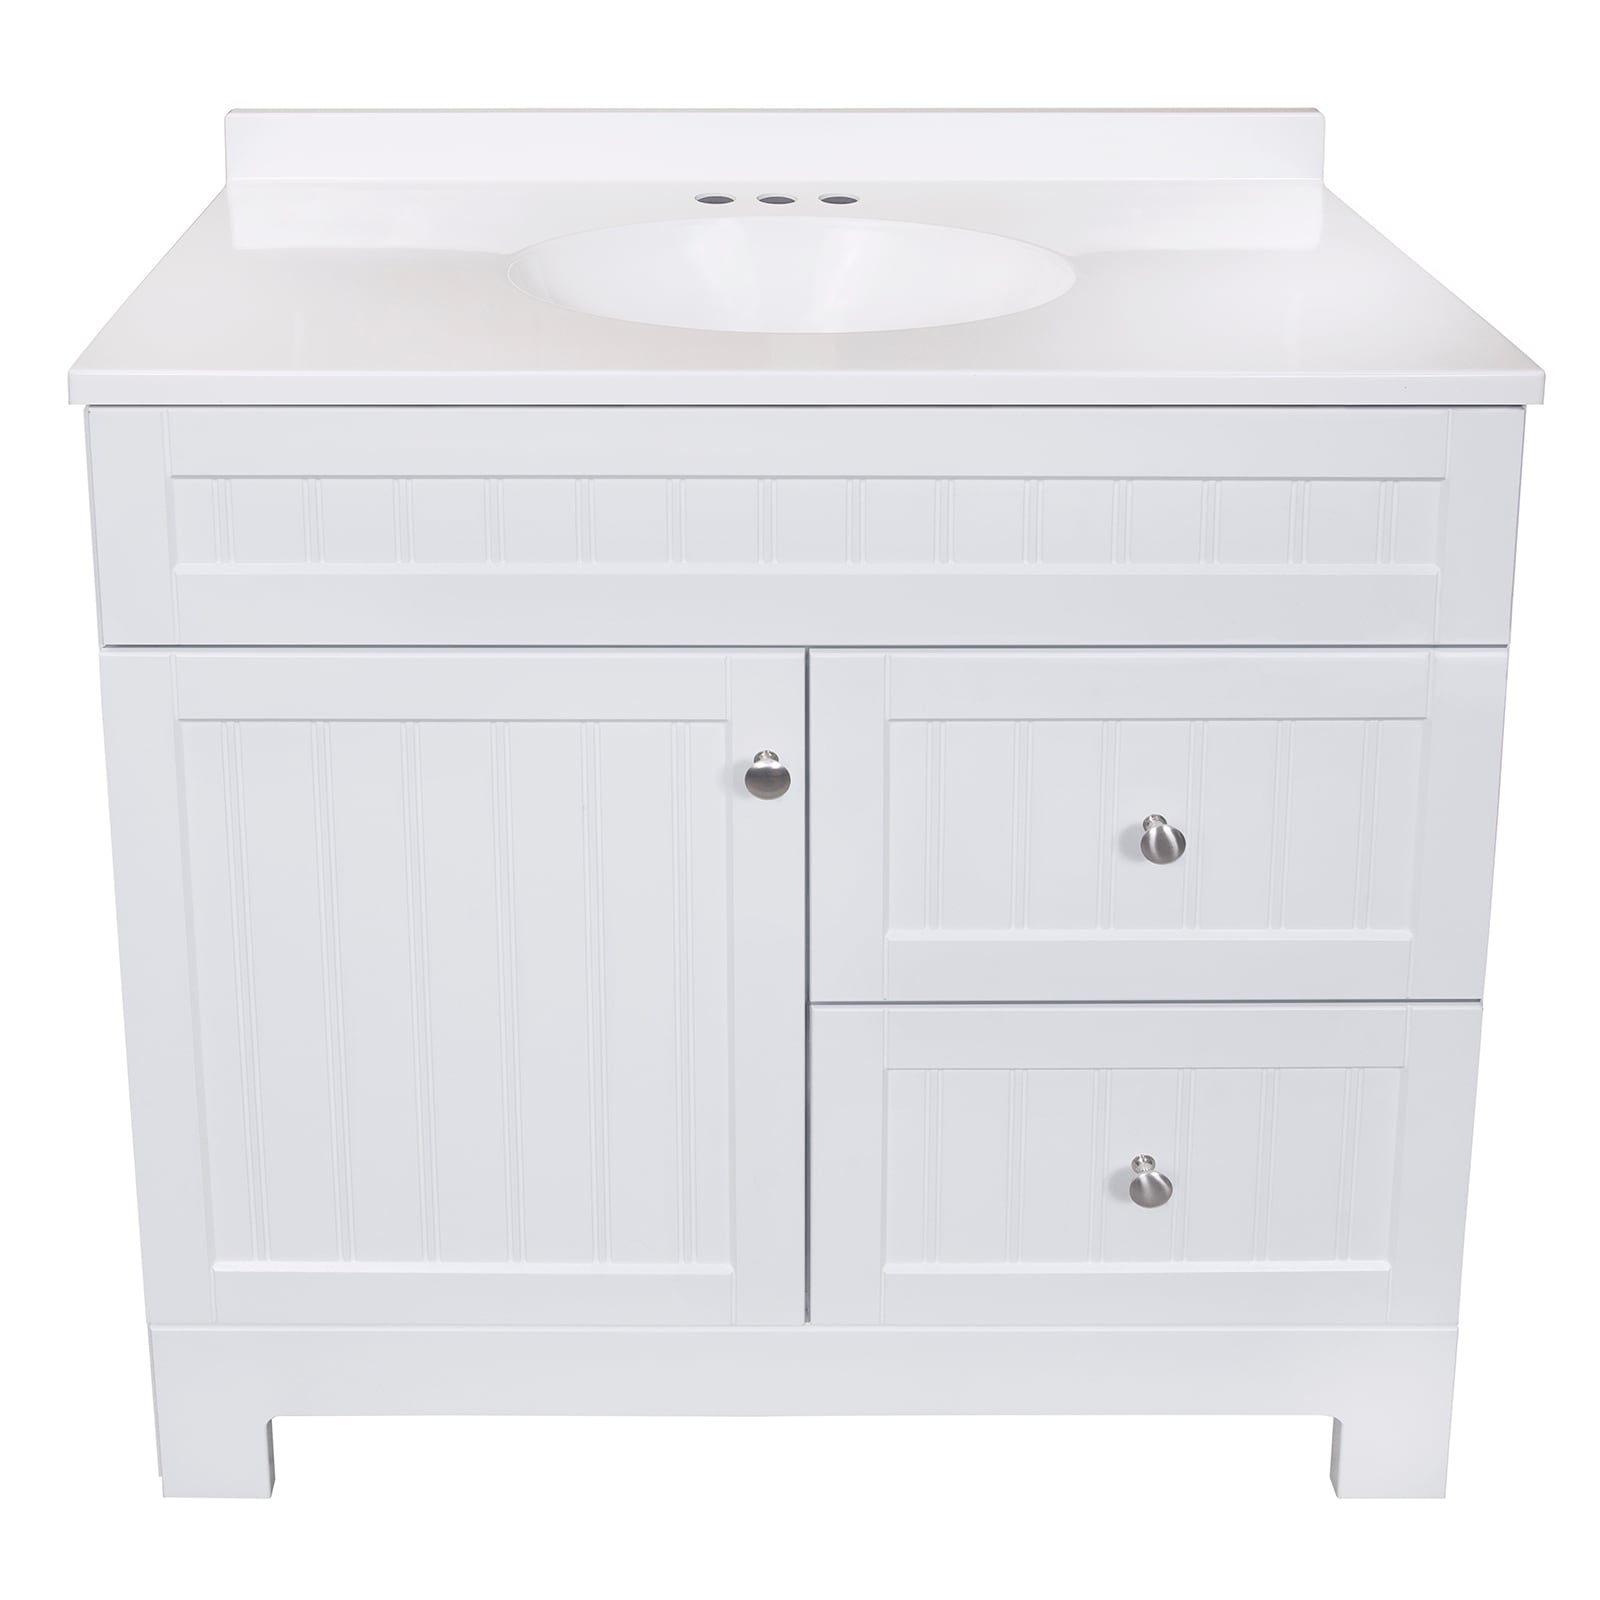 86 inch Single Sink Bathroom Vanity Set Including Makeup Table and 3  Matching Mirrors Antique White Color (86Wx22Dx36H) S7530